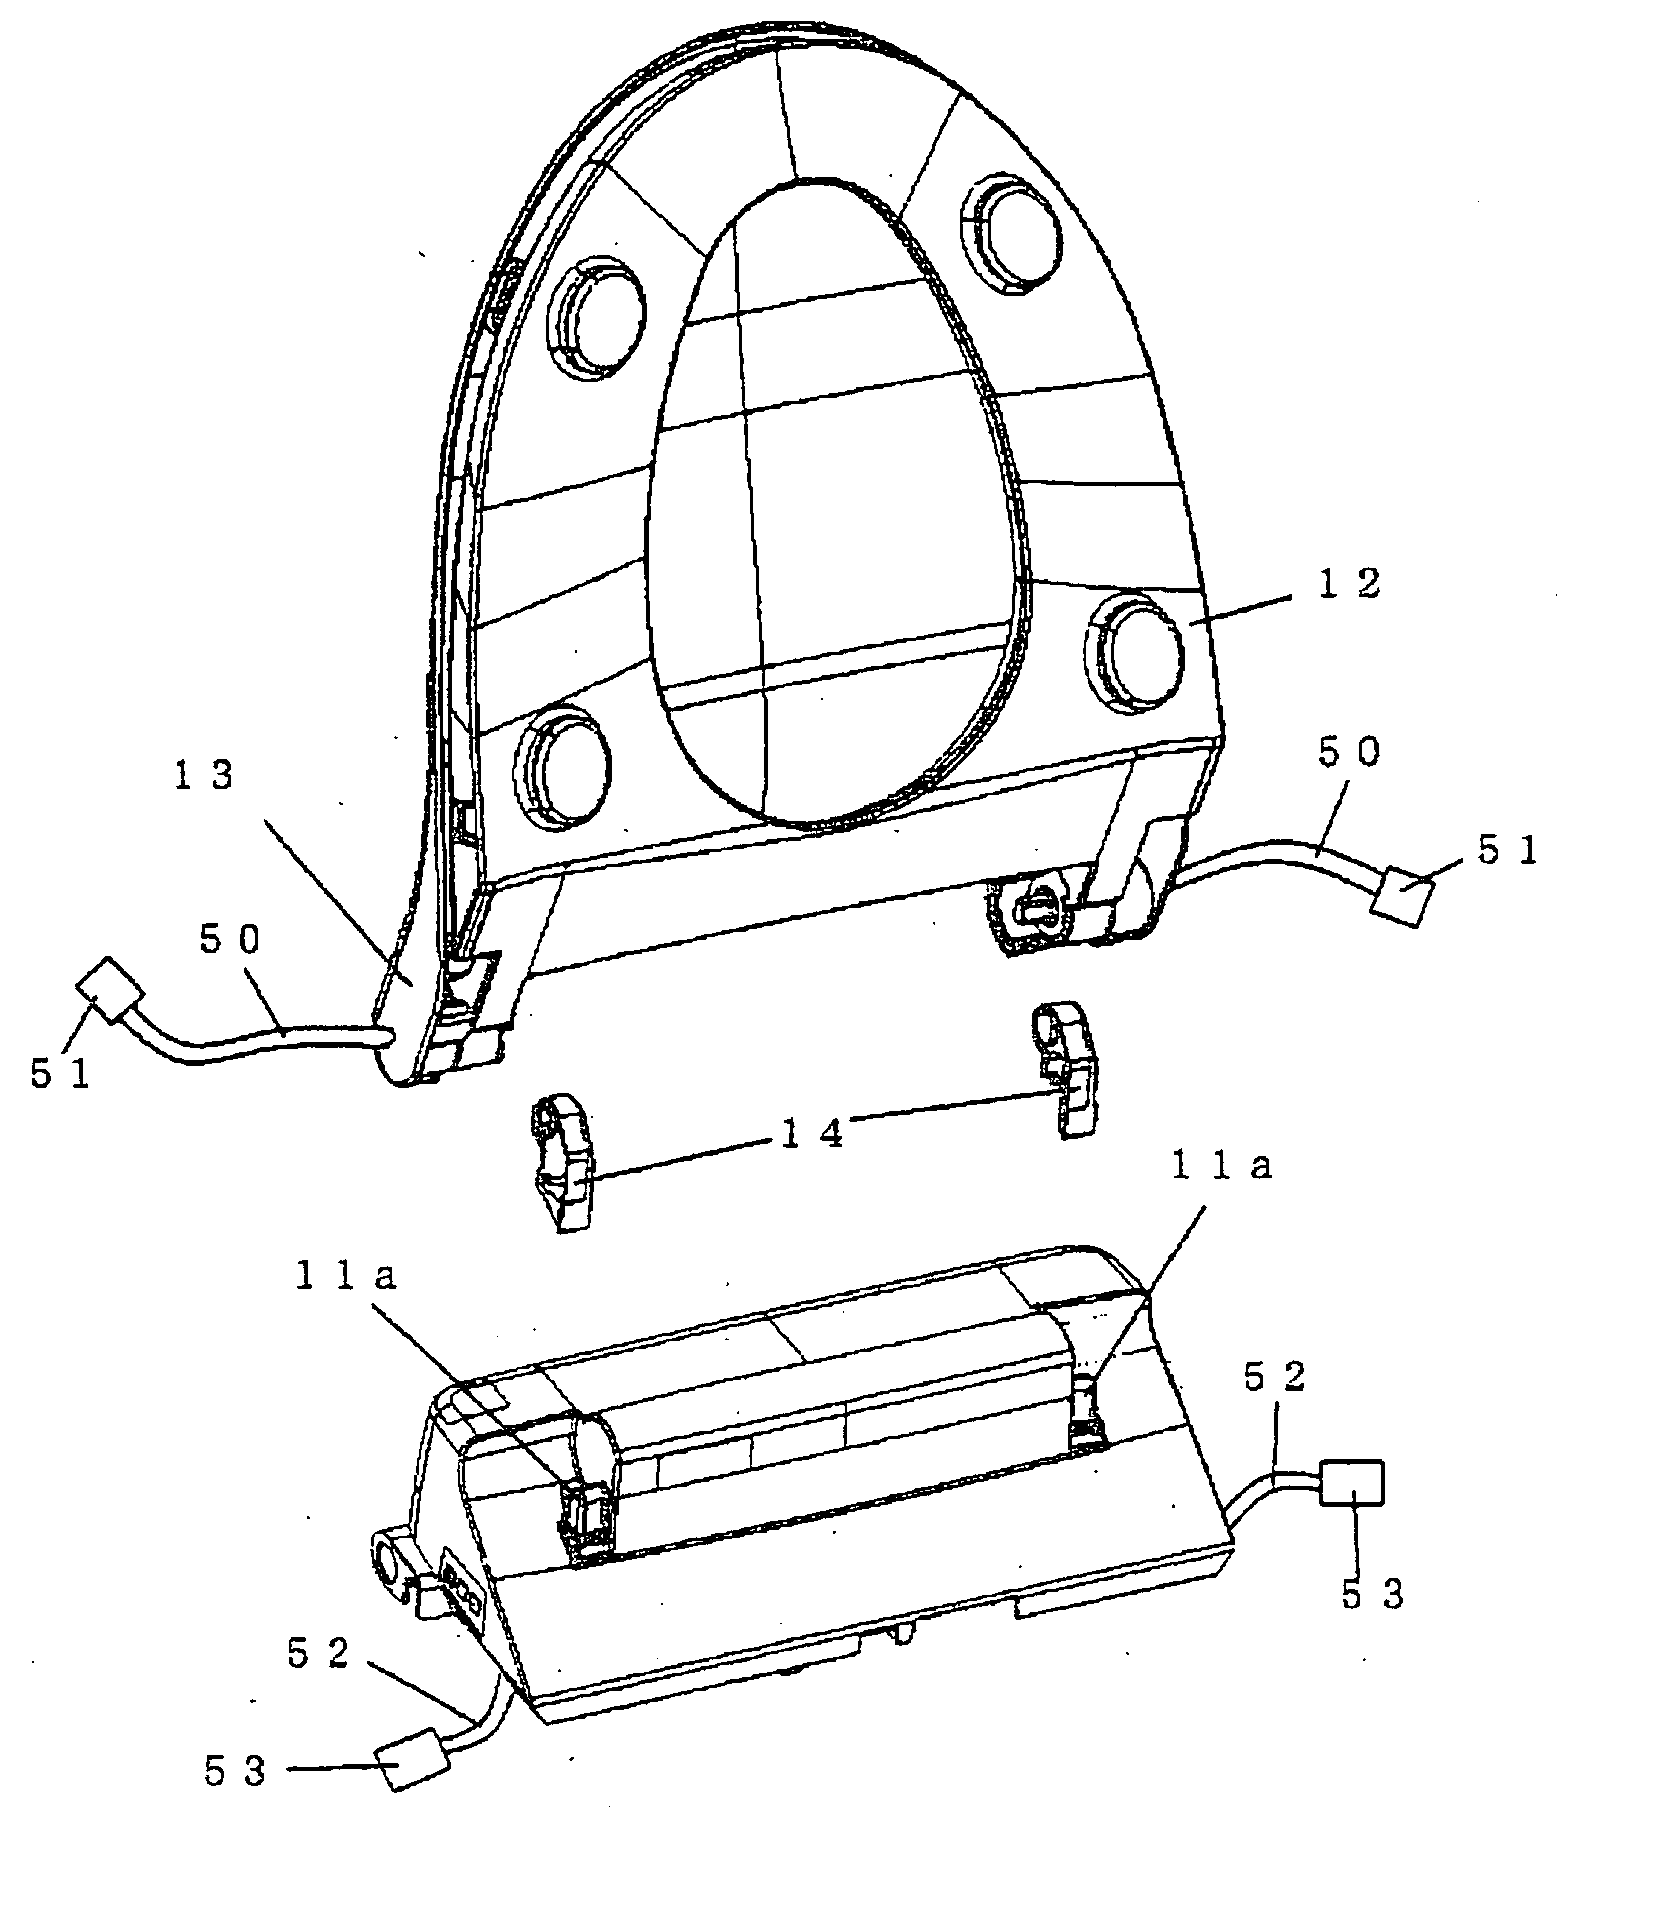 Automatic open/close device for toilet seat or toilet cover